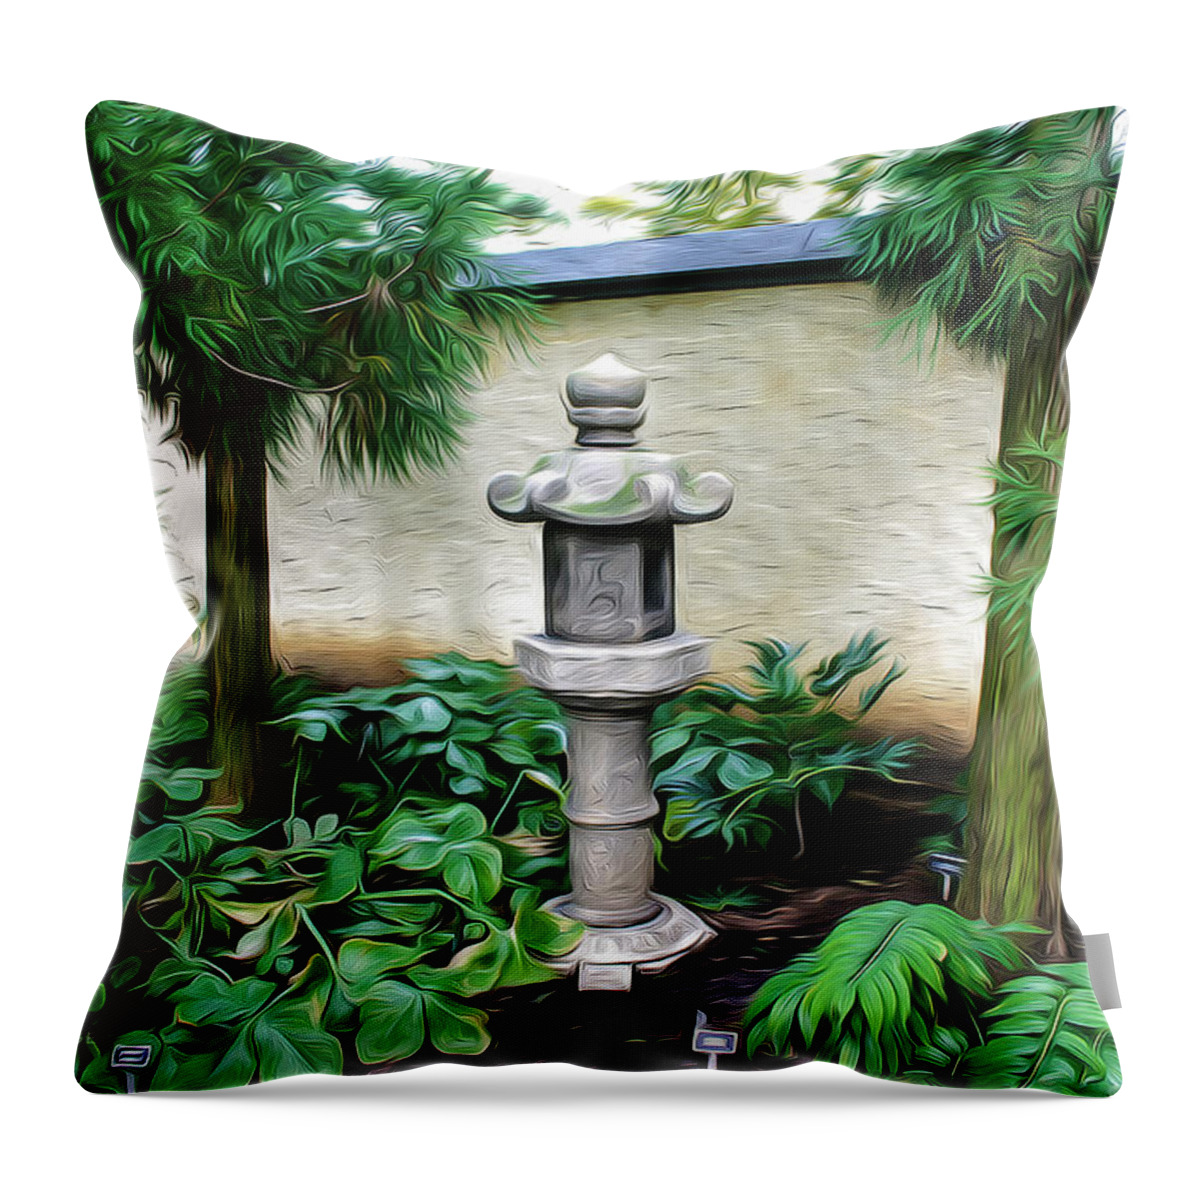 National Bonsai & Penjing Museum At The National Arboretum In Washington Throw Pillow featuring the digital art Tranquility Base by Joe Paradis